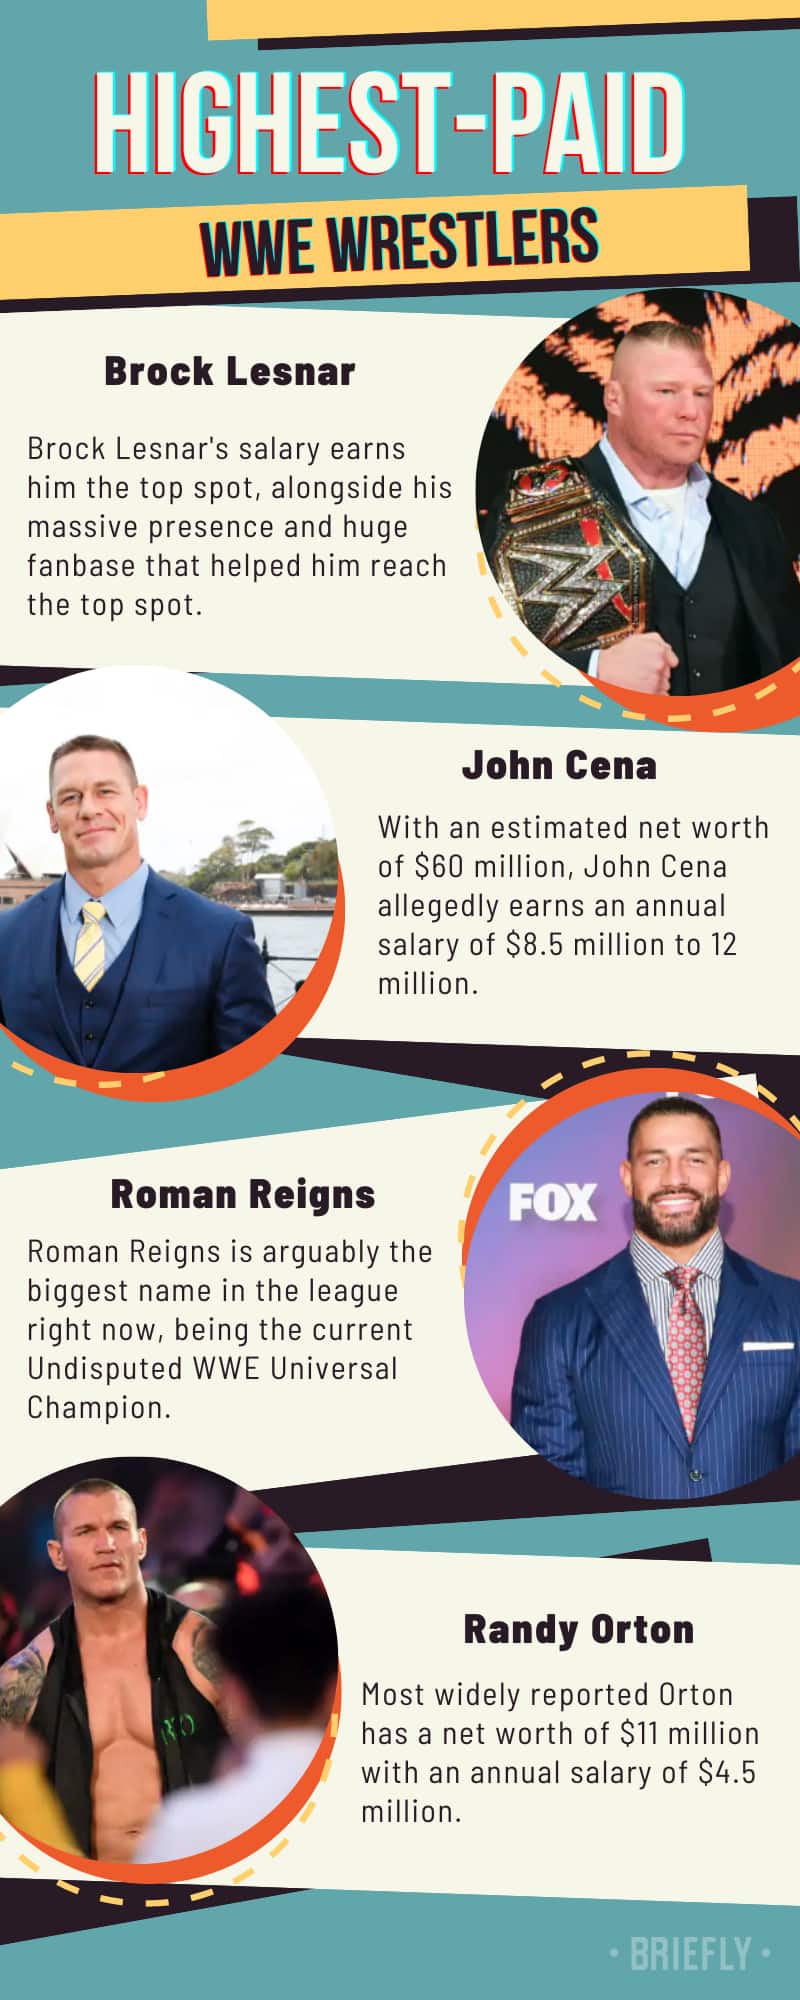 Highest-paid WWE wrestlers and their net worths